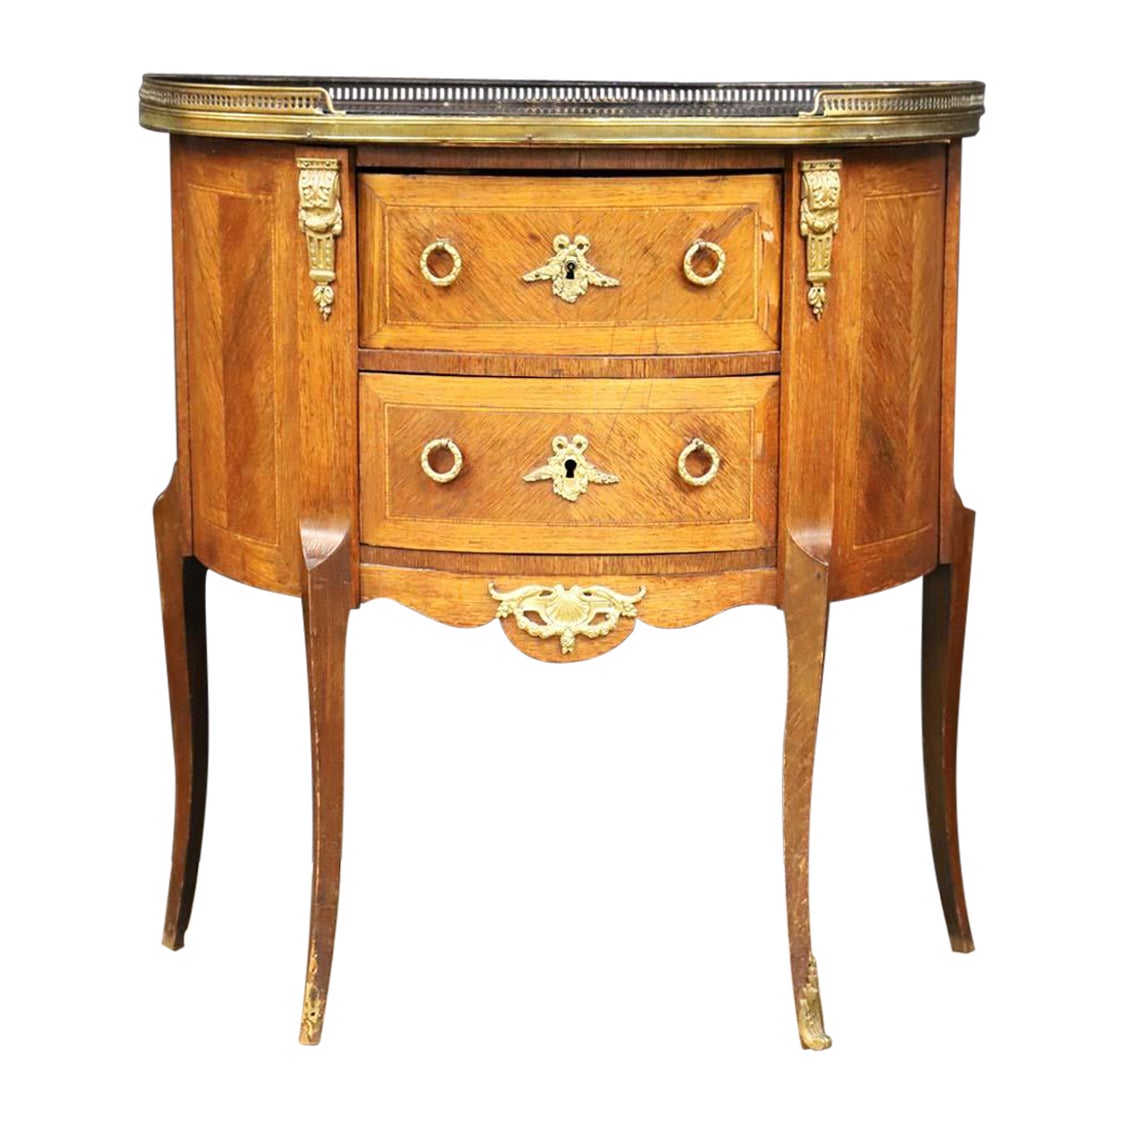 Antique Louis XVI Style Mahogany Demilune Table With Glass Top and Gallery For Sale